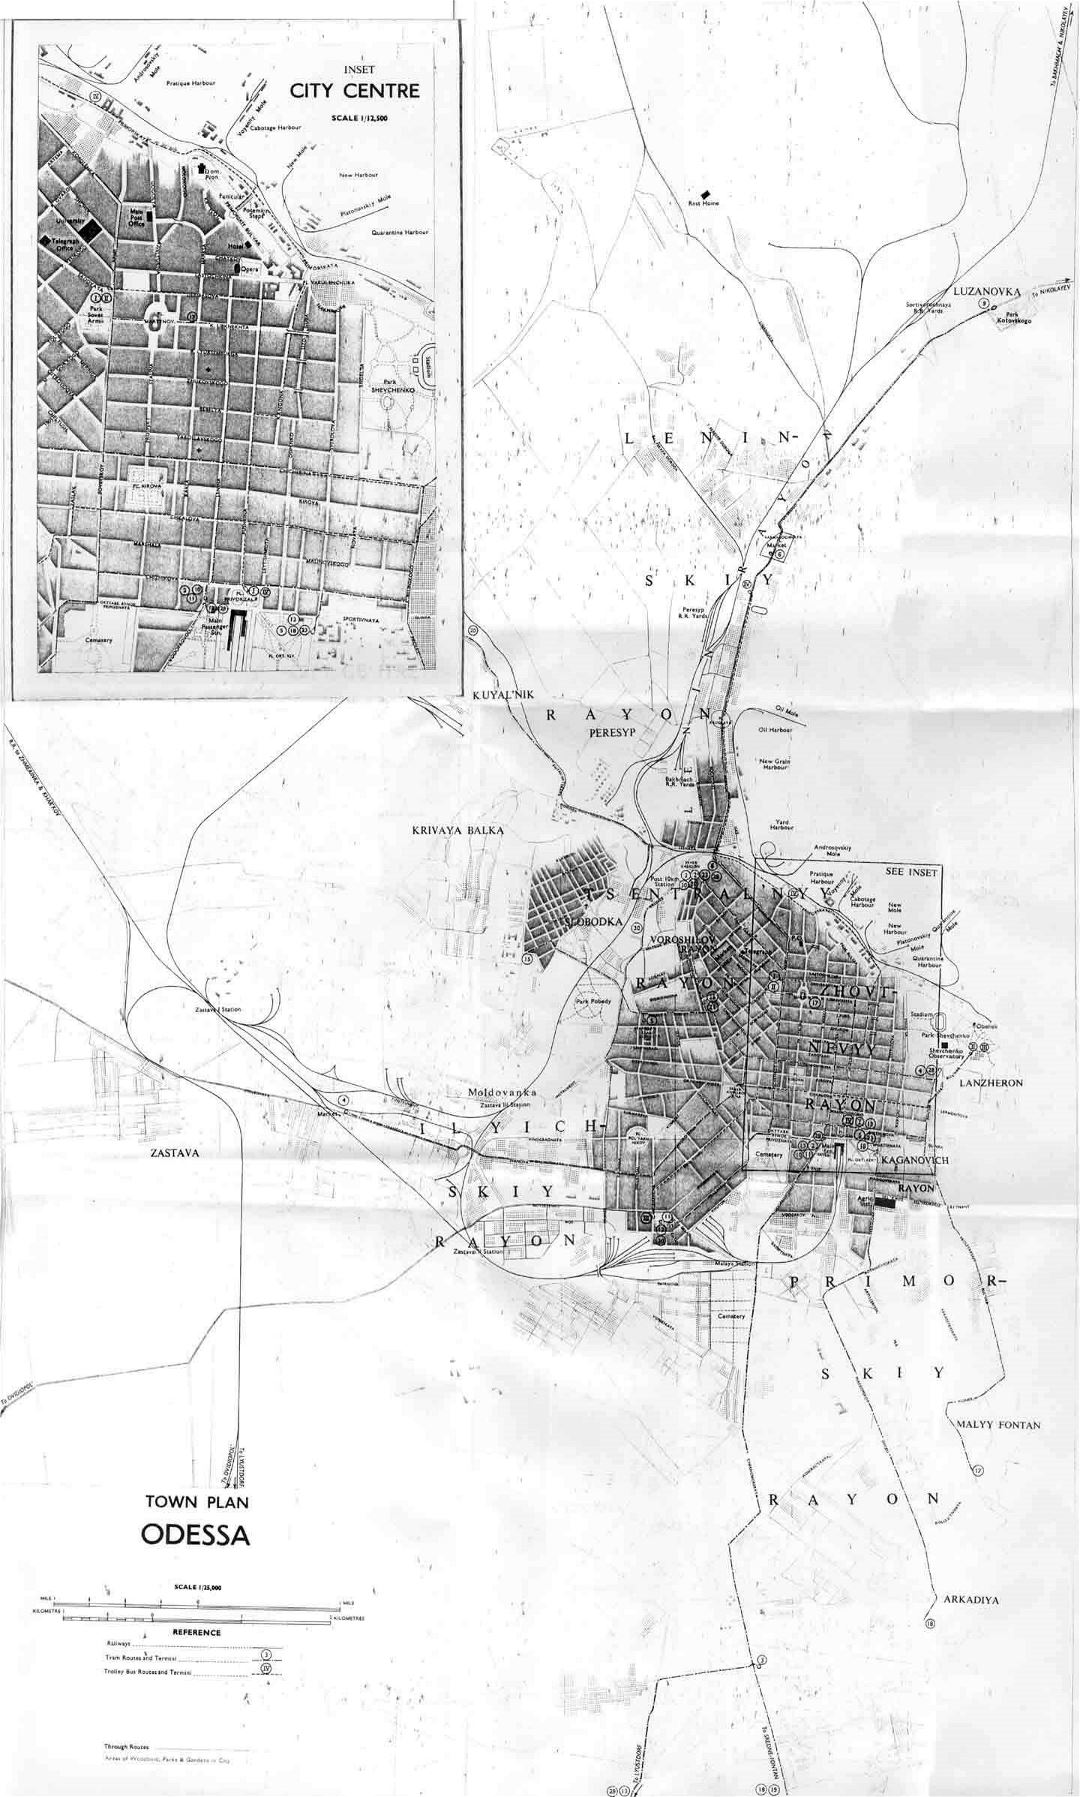 Detailed old map of Odessa city - 1961